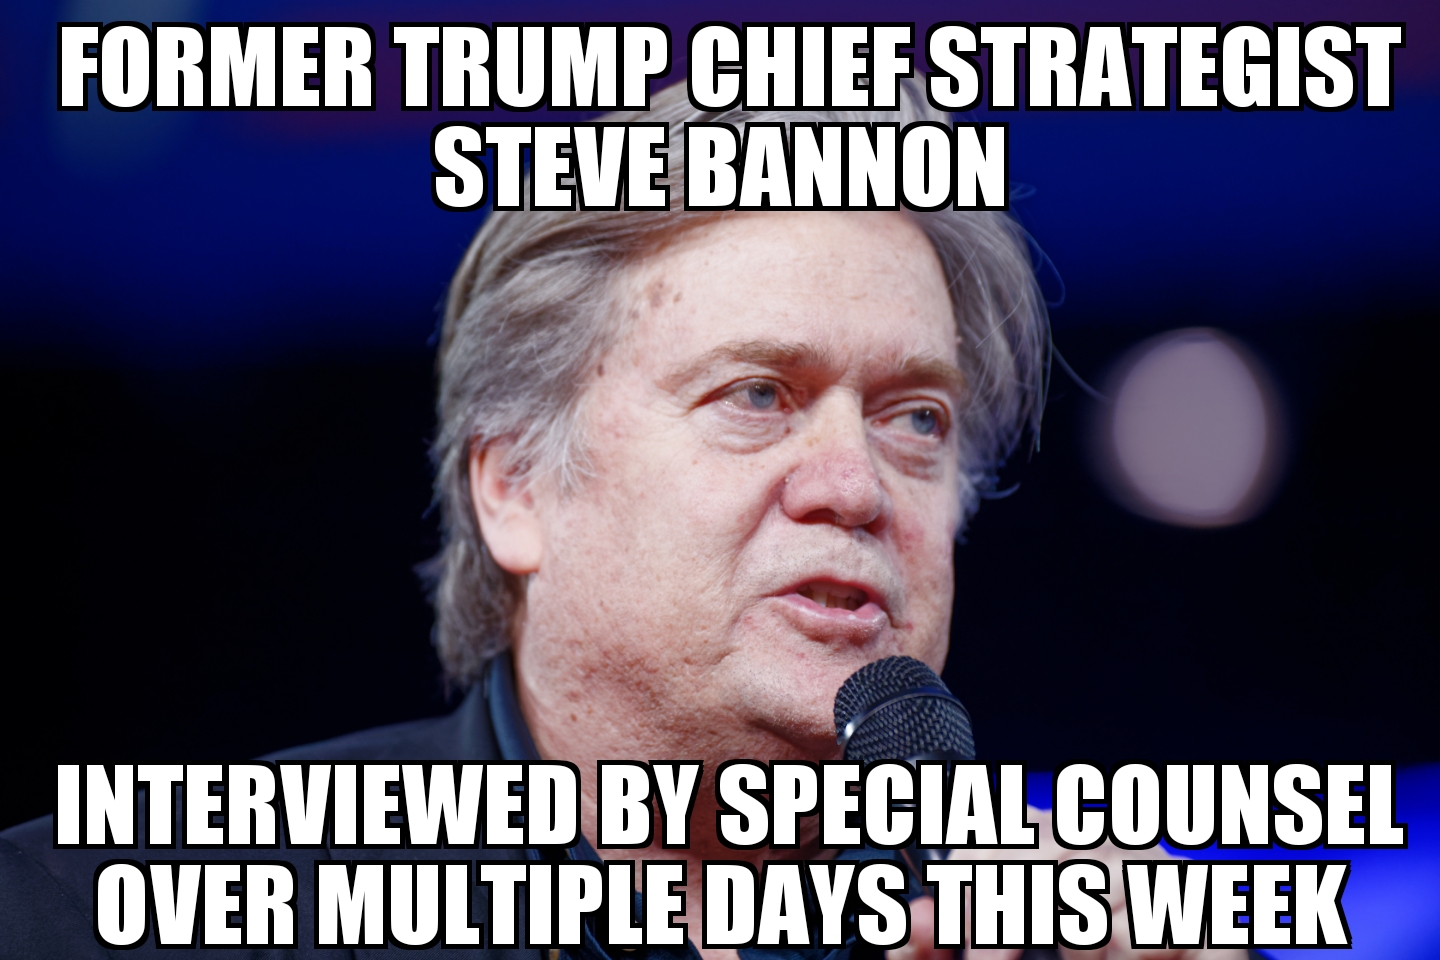 Steve Bannon interviewed by Special Counsel